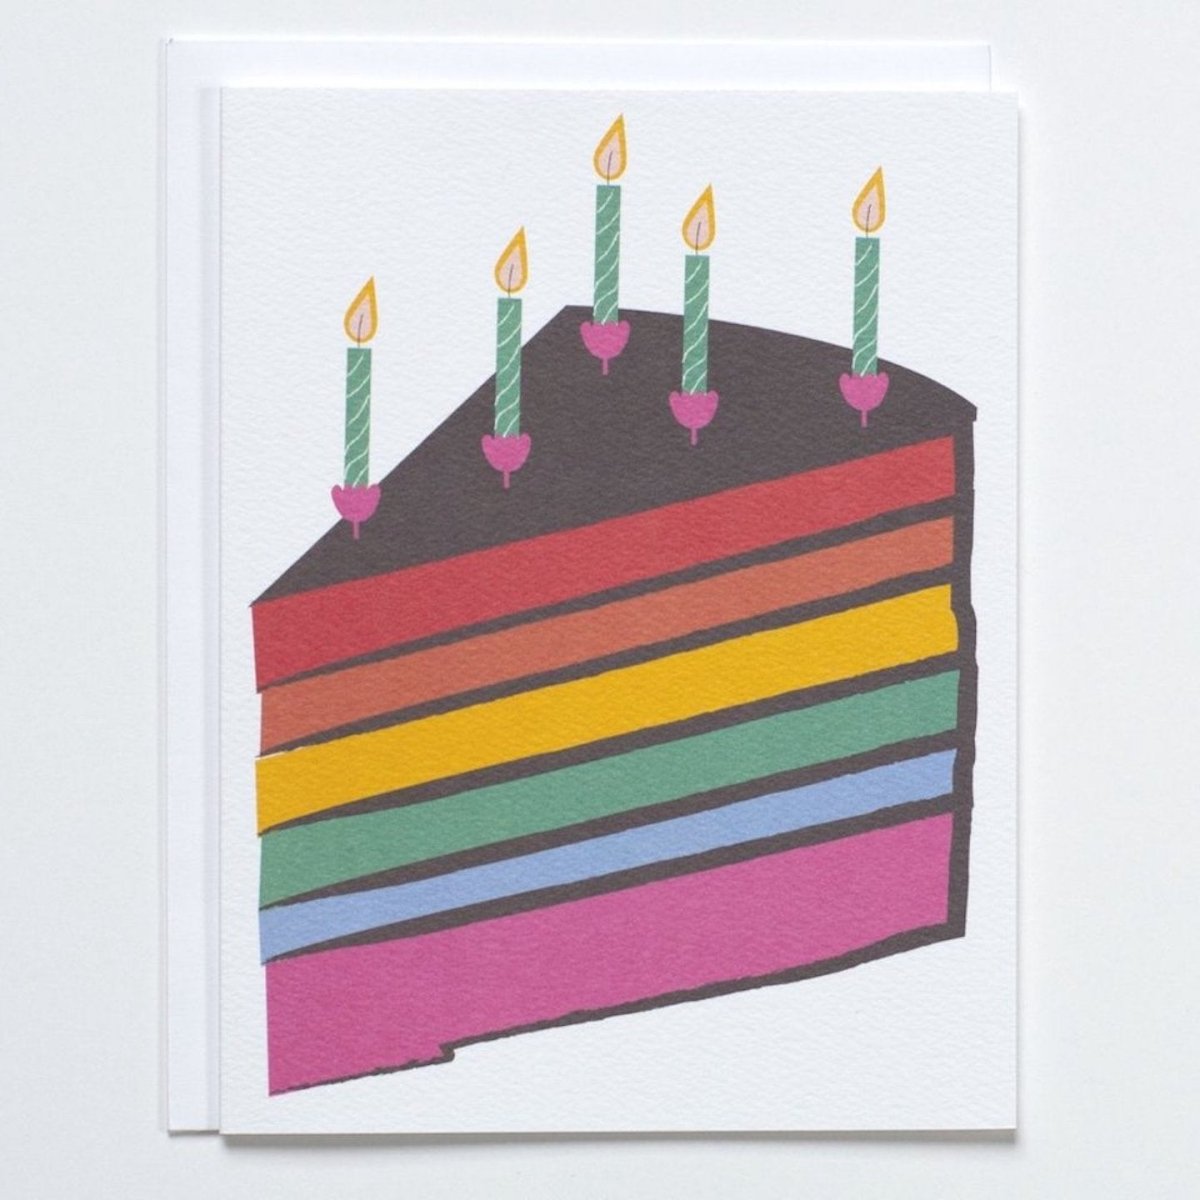 White card with a large illustration of a birthday cake slice in the colors of the rainbow. Cake slice is topped with green and pink candles with yellow and orange flames. Made with recycled paper by Banquet Atelier in Vancouver, British Columbia, Canada.